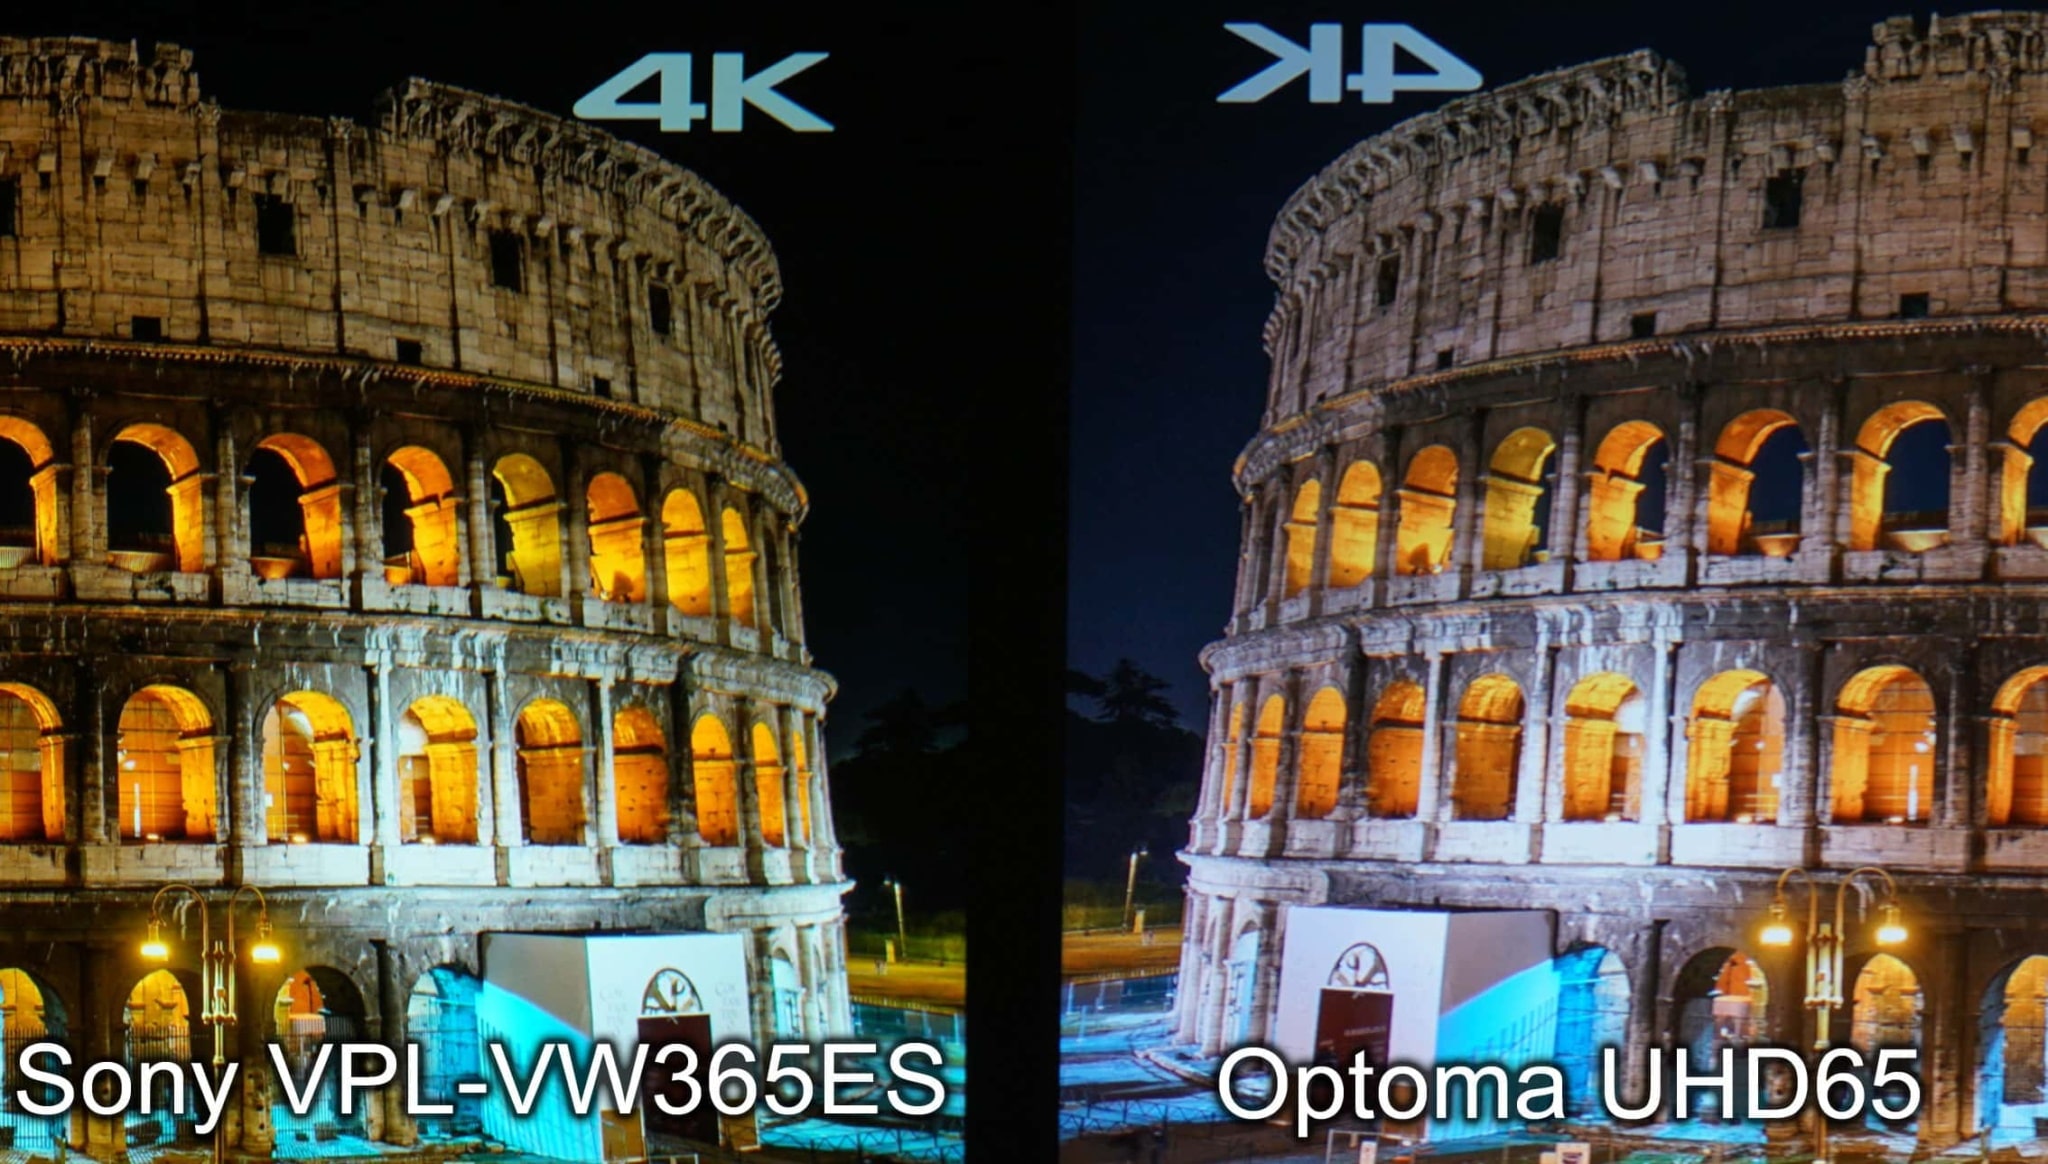 Sony VPL-VW365ES vs Optoma UHD65: Semi closeup. Slight tone variation is due to the presets of D6500K not being exactly equal. Still, the Optoma had great color overall. Notice the differences in blacks and intensity of highlights without losing color.